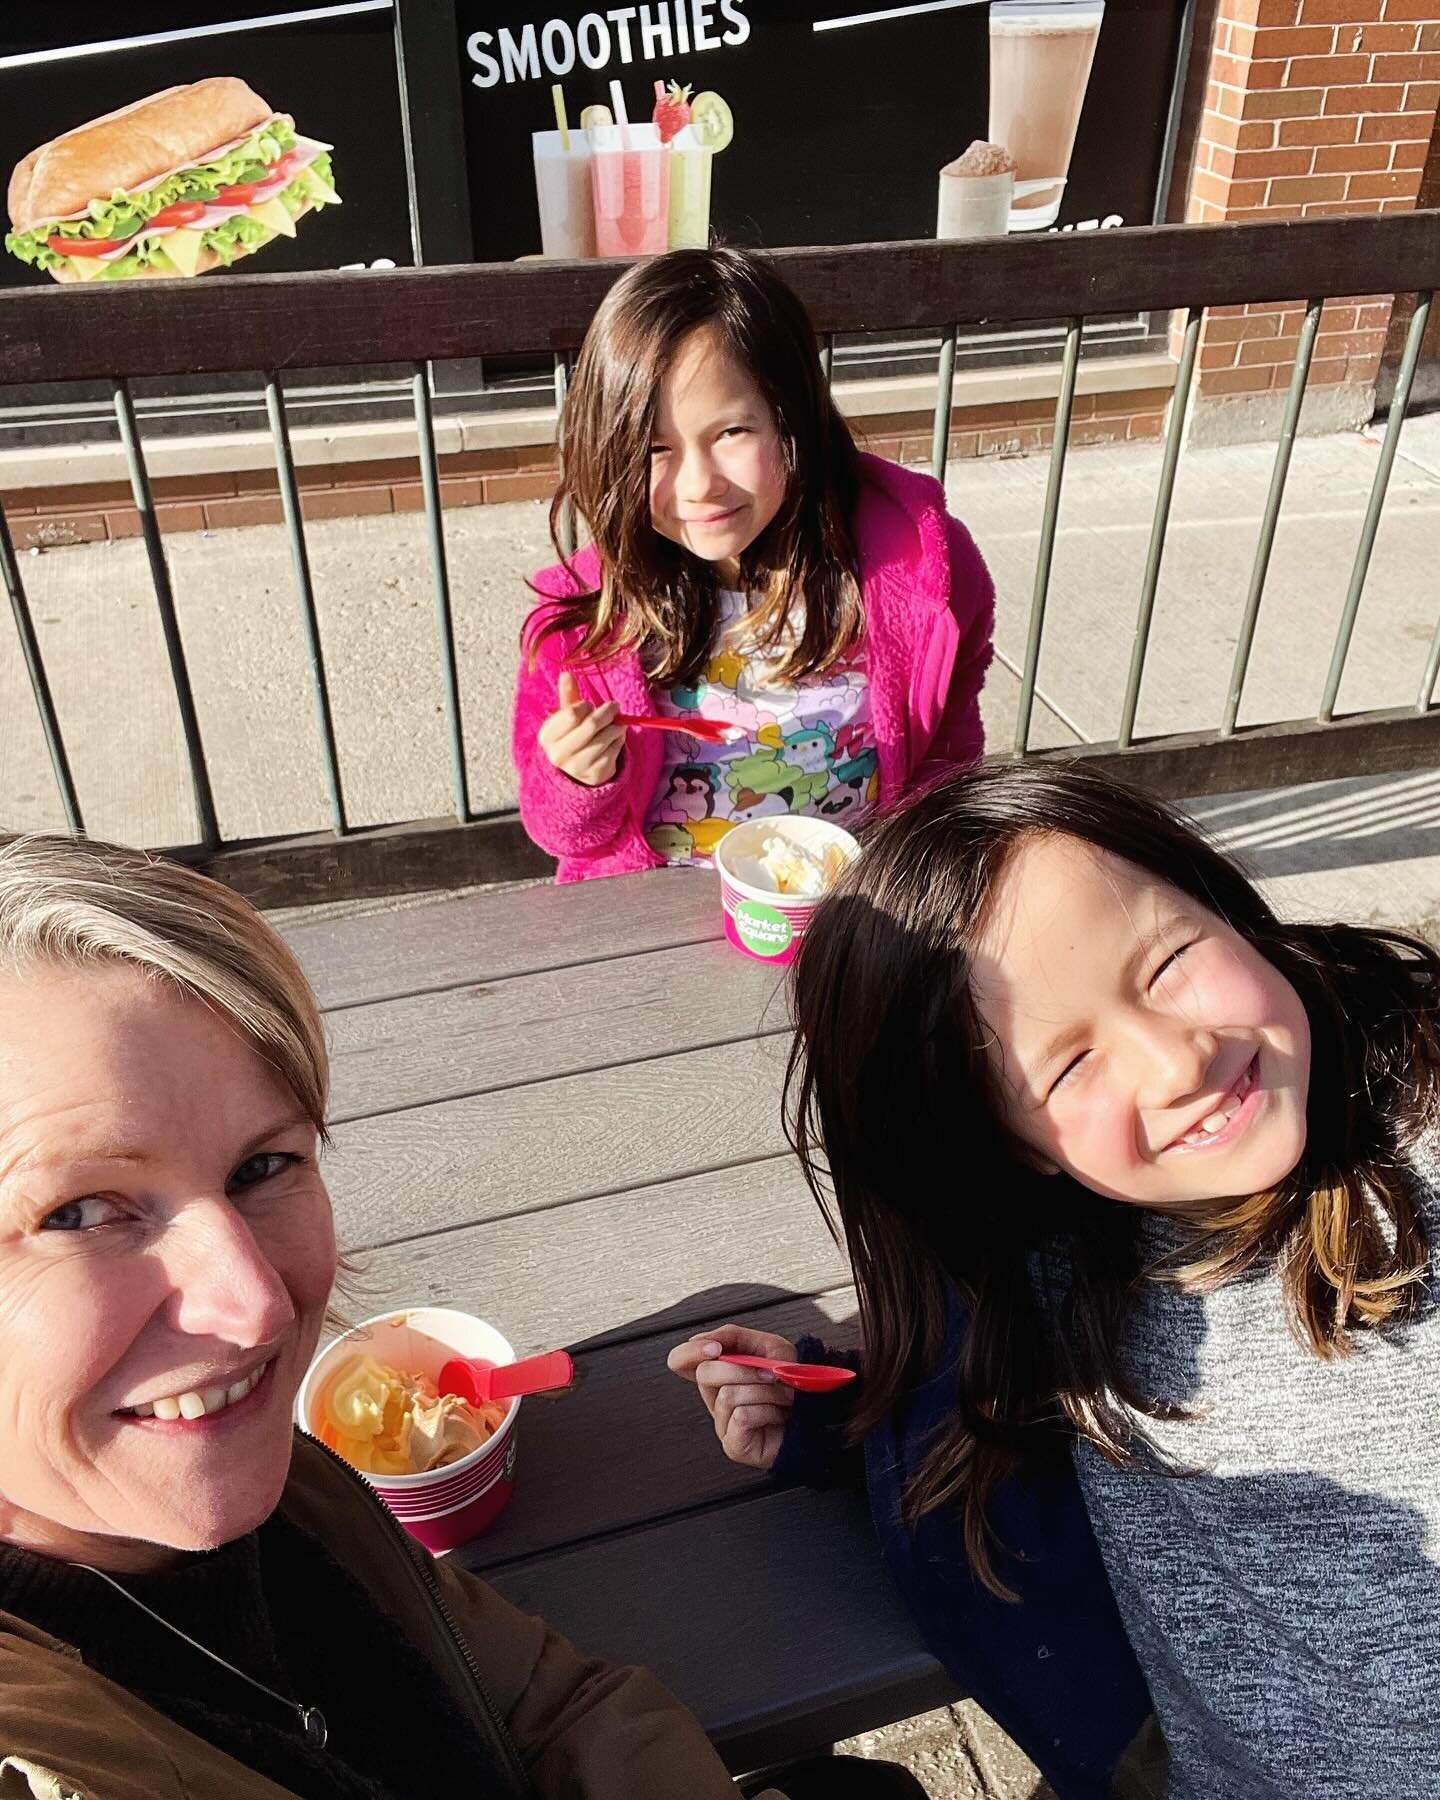 It is so sunny, it crinkles your face, so warm you can actually eat frozen yogurt outside,&hellip; it is February in Chicago! 😳 #winterspring #thisweatherisweird